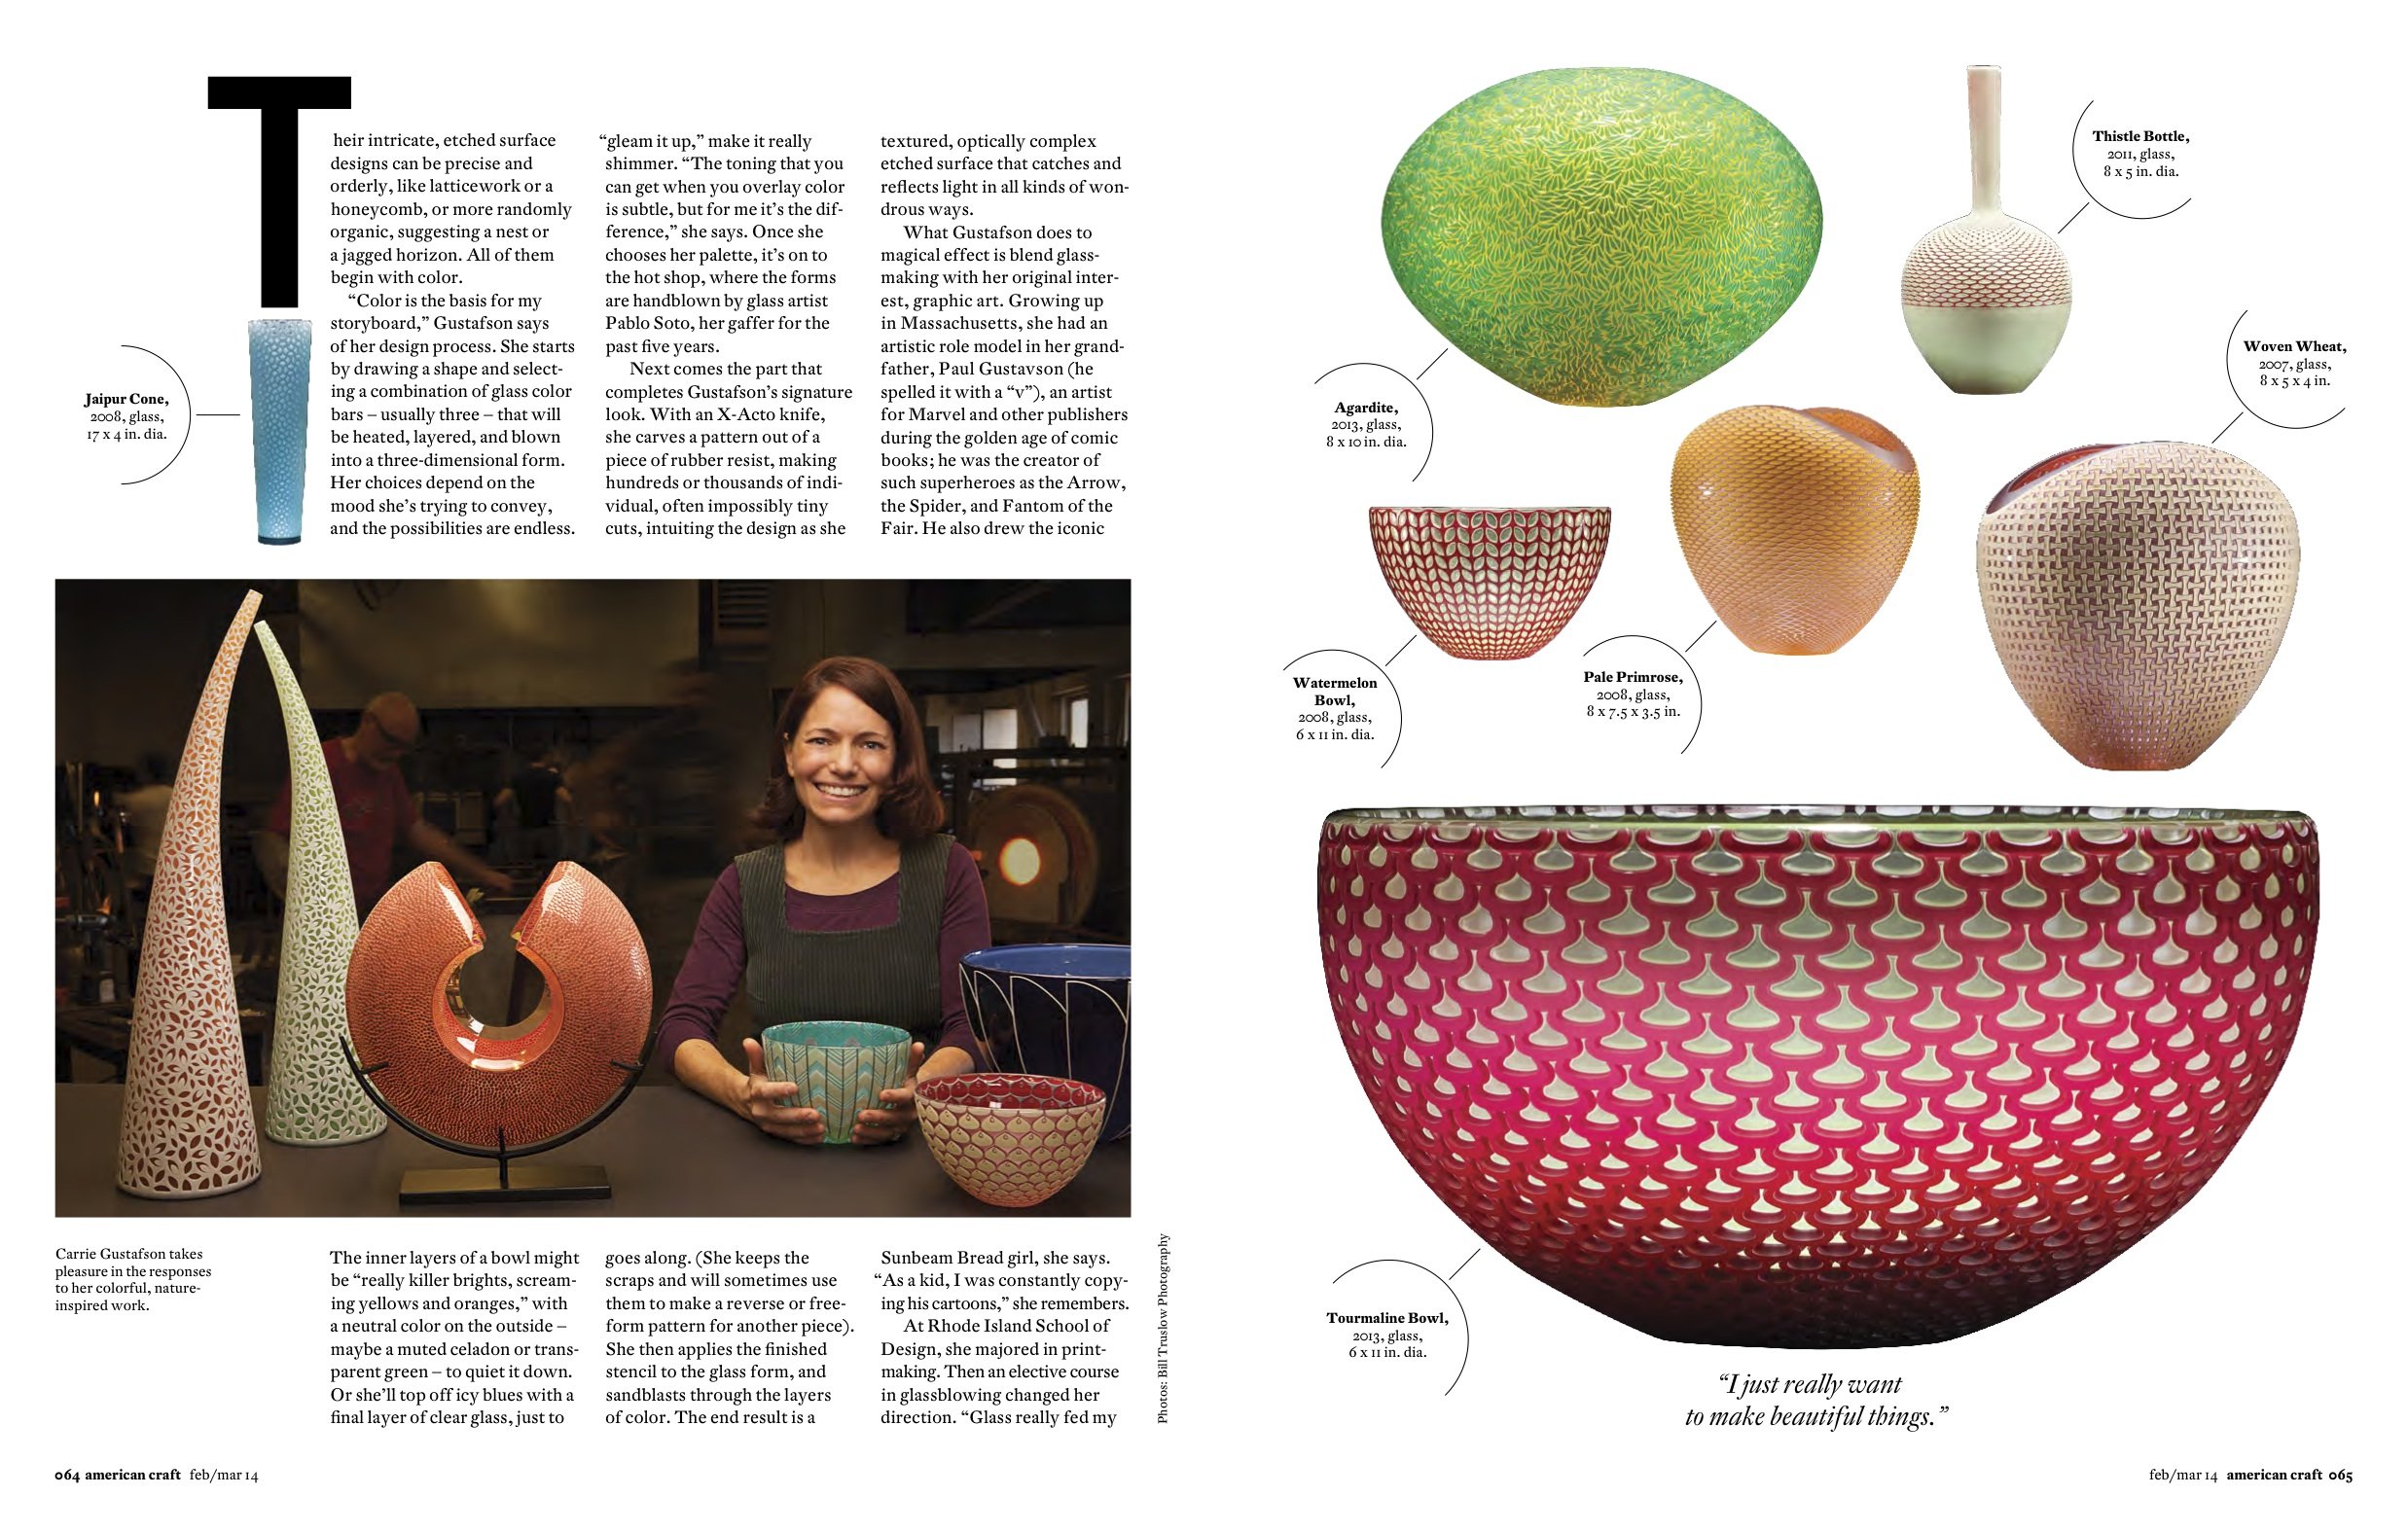 Carrie Gustafson and her special pieces for glass collectors featured in a magazine article